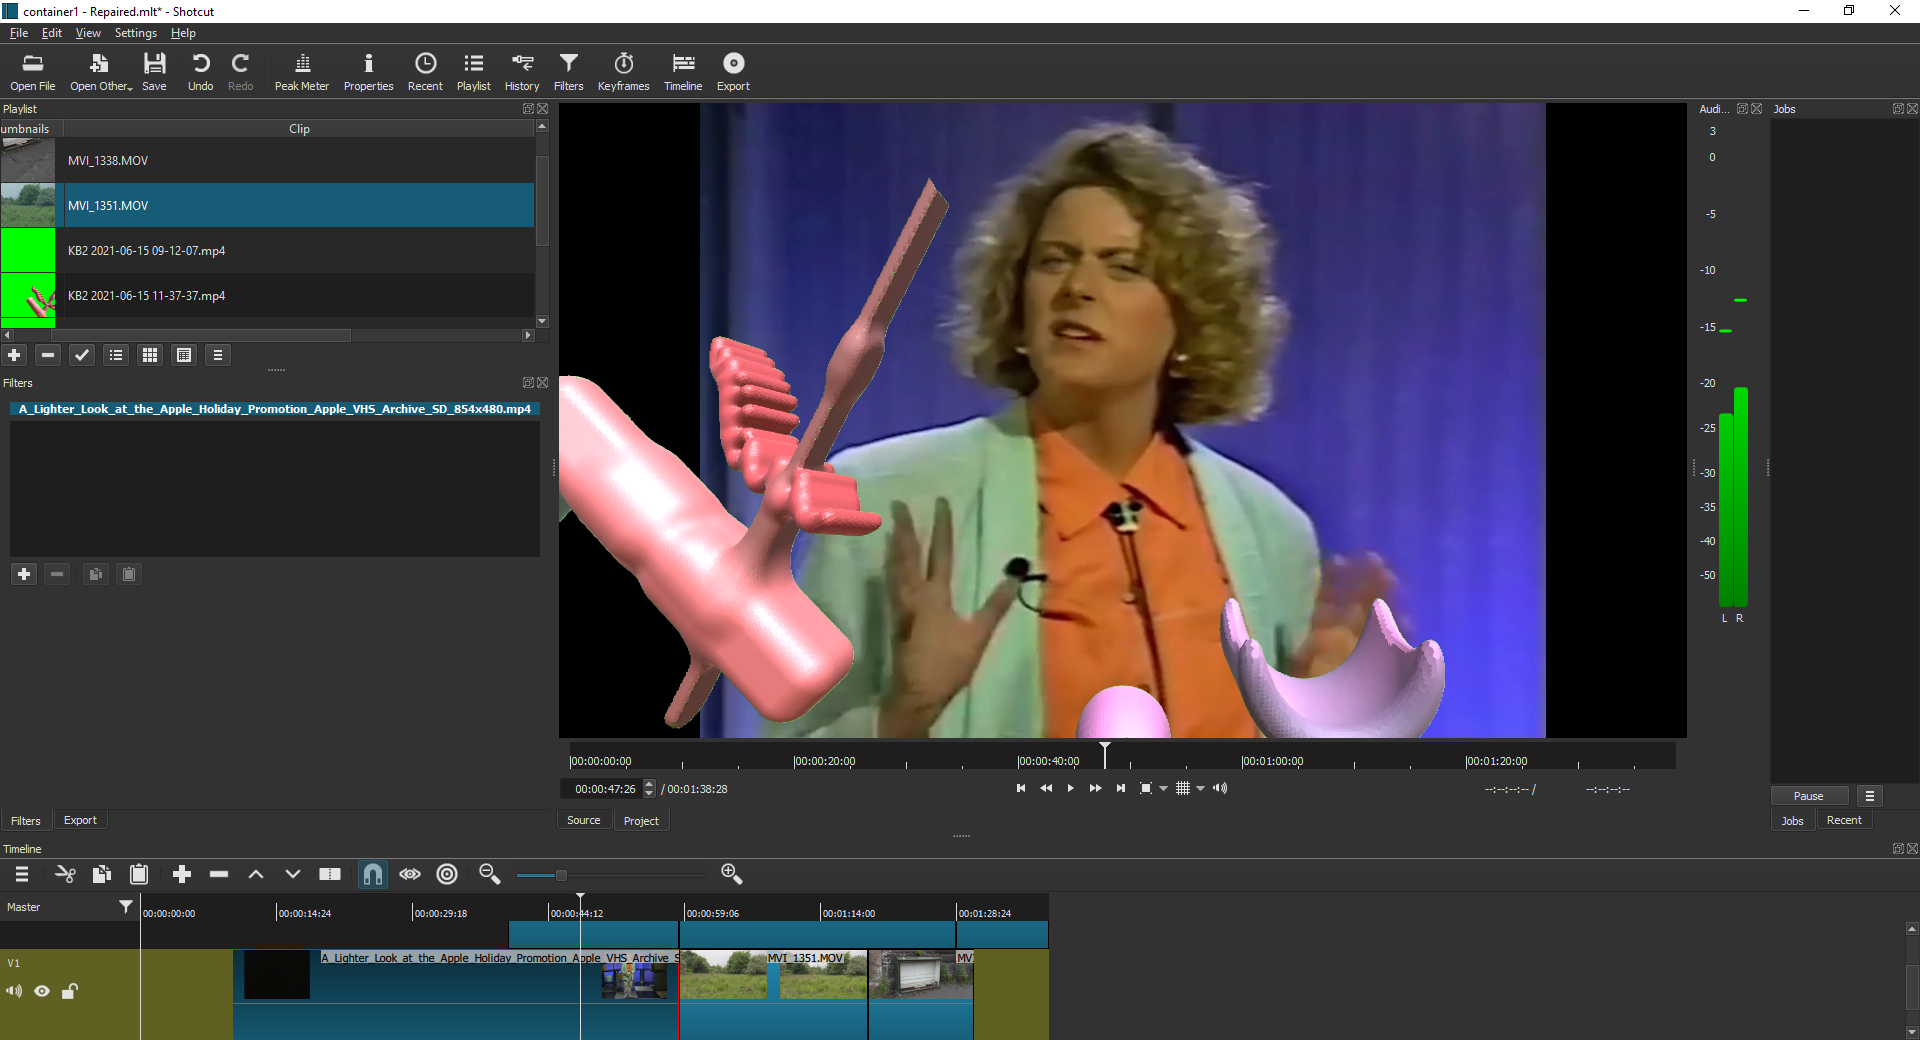 A video editing screen, with an image of a woman wearing an orange shirt in the top right corner, layered over with abstract shapes